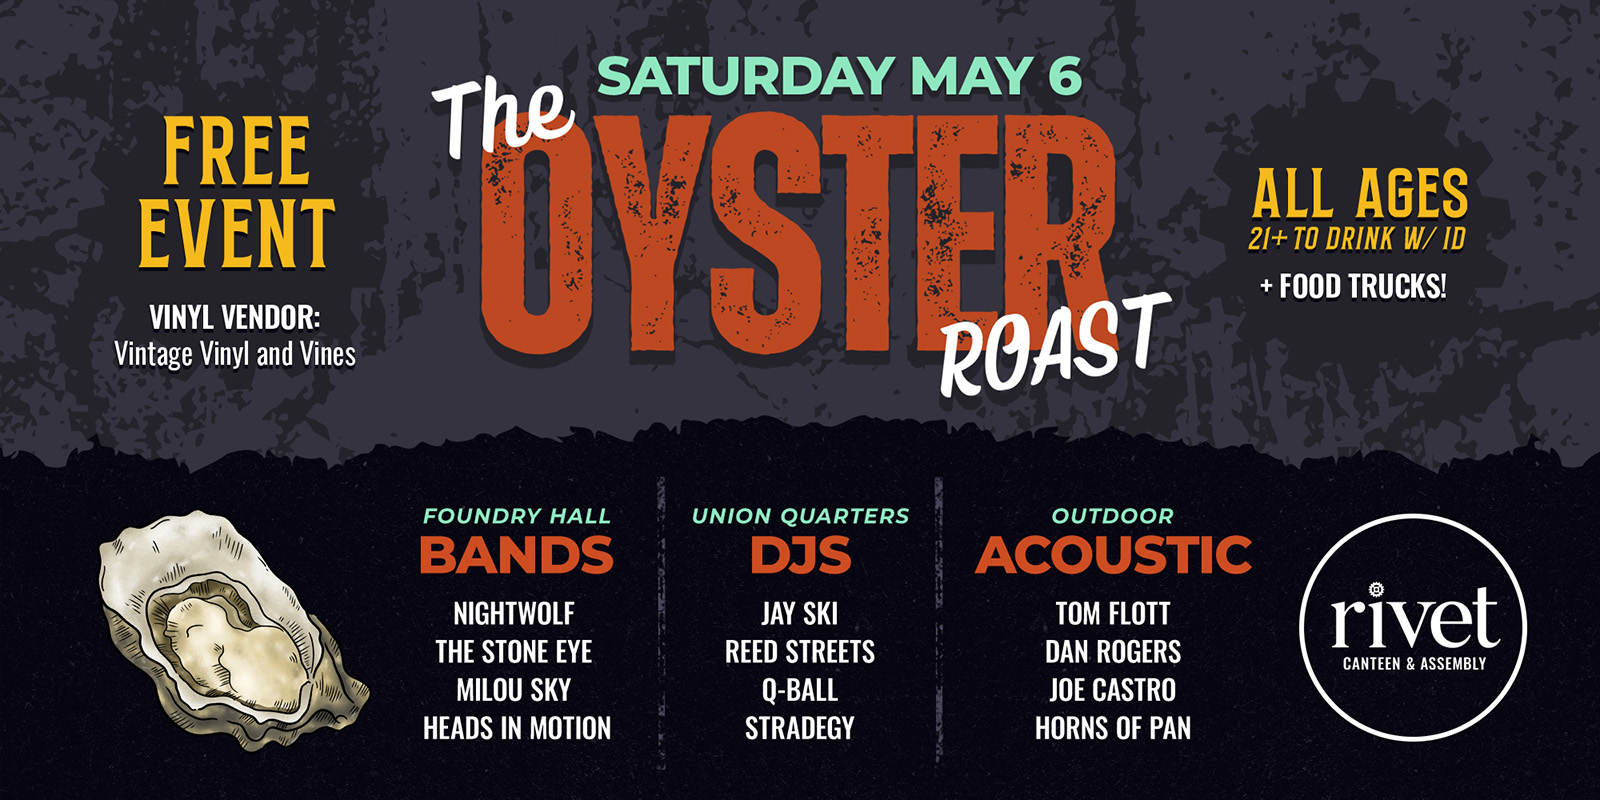 Kick off the 2023 Pottstown Nights Car Show Series on High Street with a special FREE Rivet event - our first annual Oyster Roast! Enjoy food, music, and drinks on two levels, including our outdoor terrace at Rivet. Doors open at 6:00 PM upstairs (main room), and Union Quarters opens at 7:00 PM.